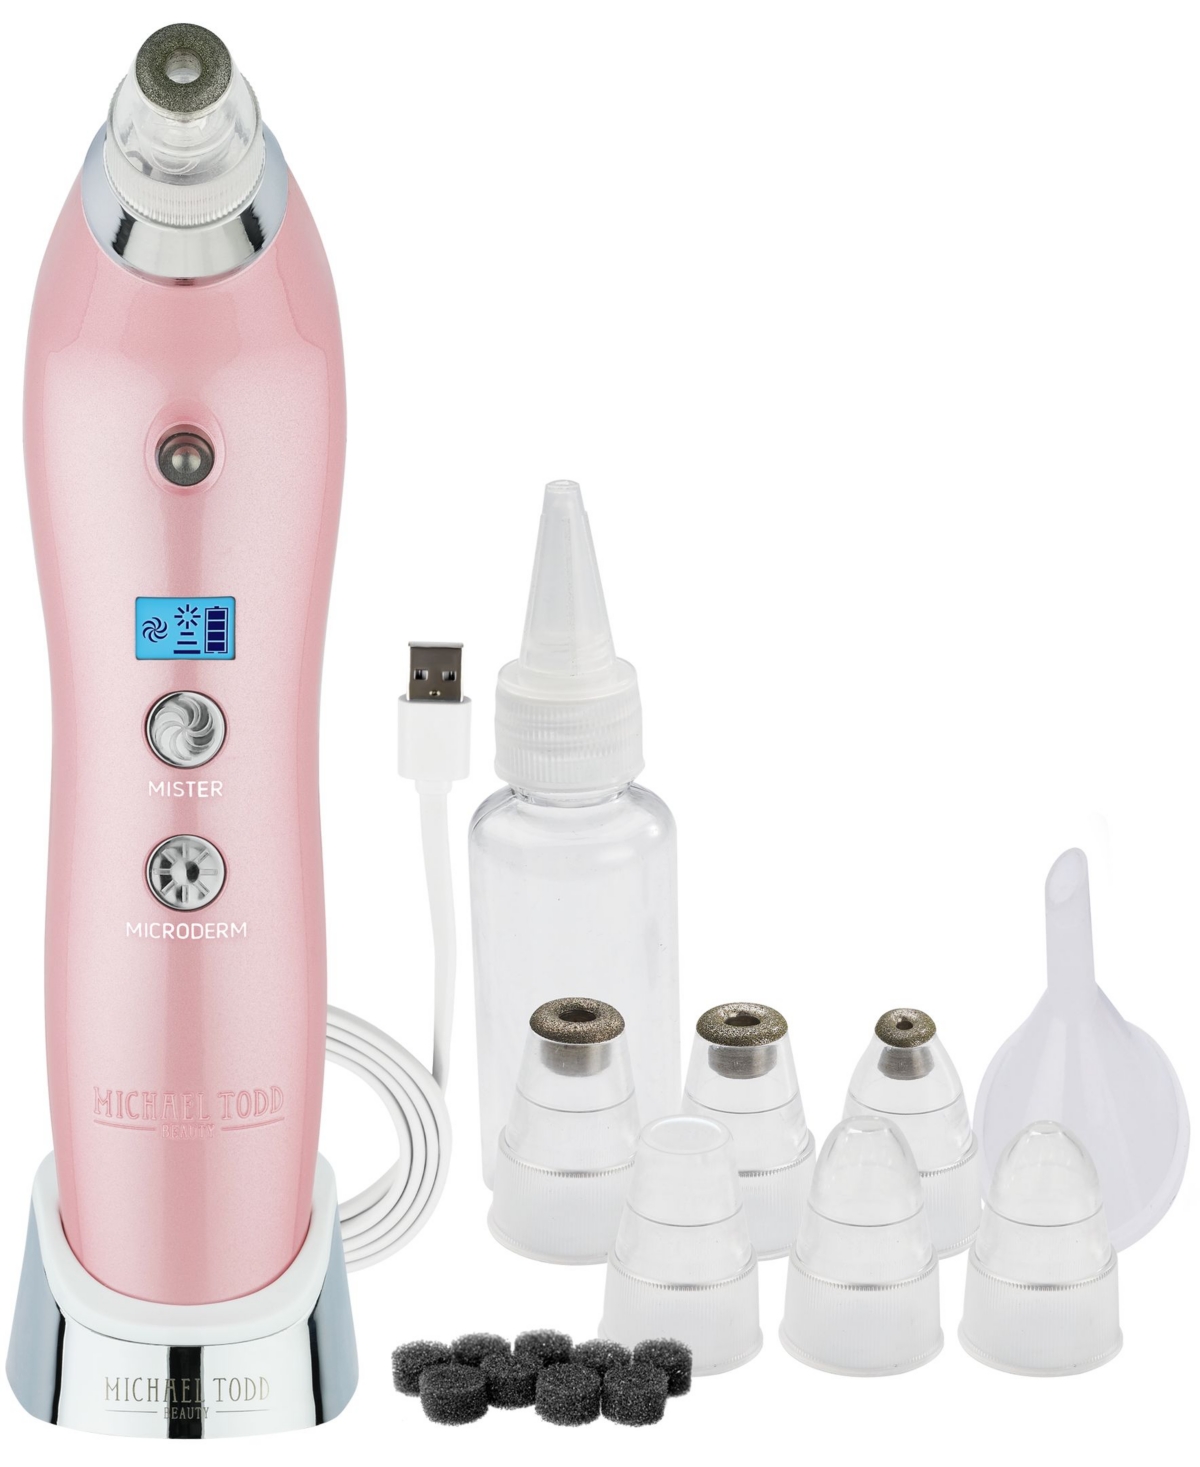 Michael Todd Beauty Sonic Refresher Sonic Microdermabrasion and Pore Extraction System